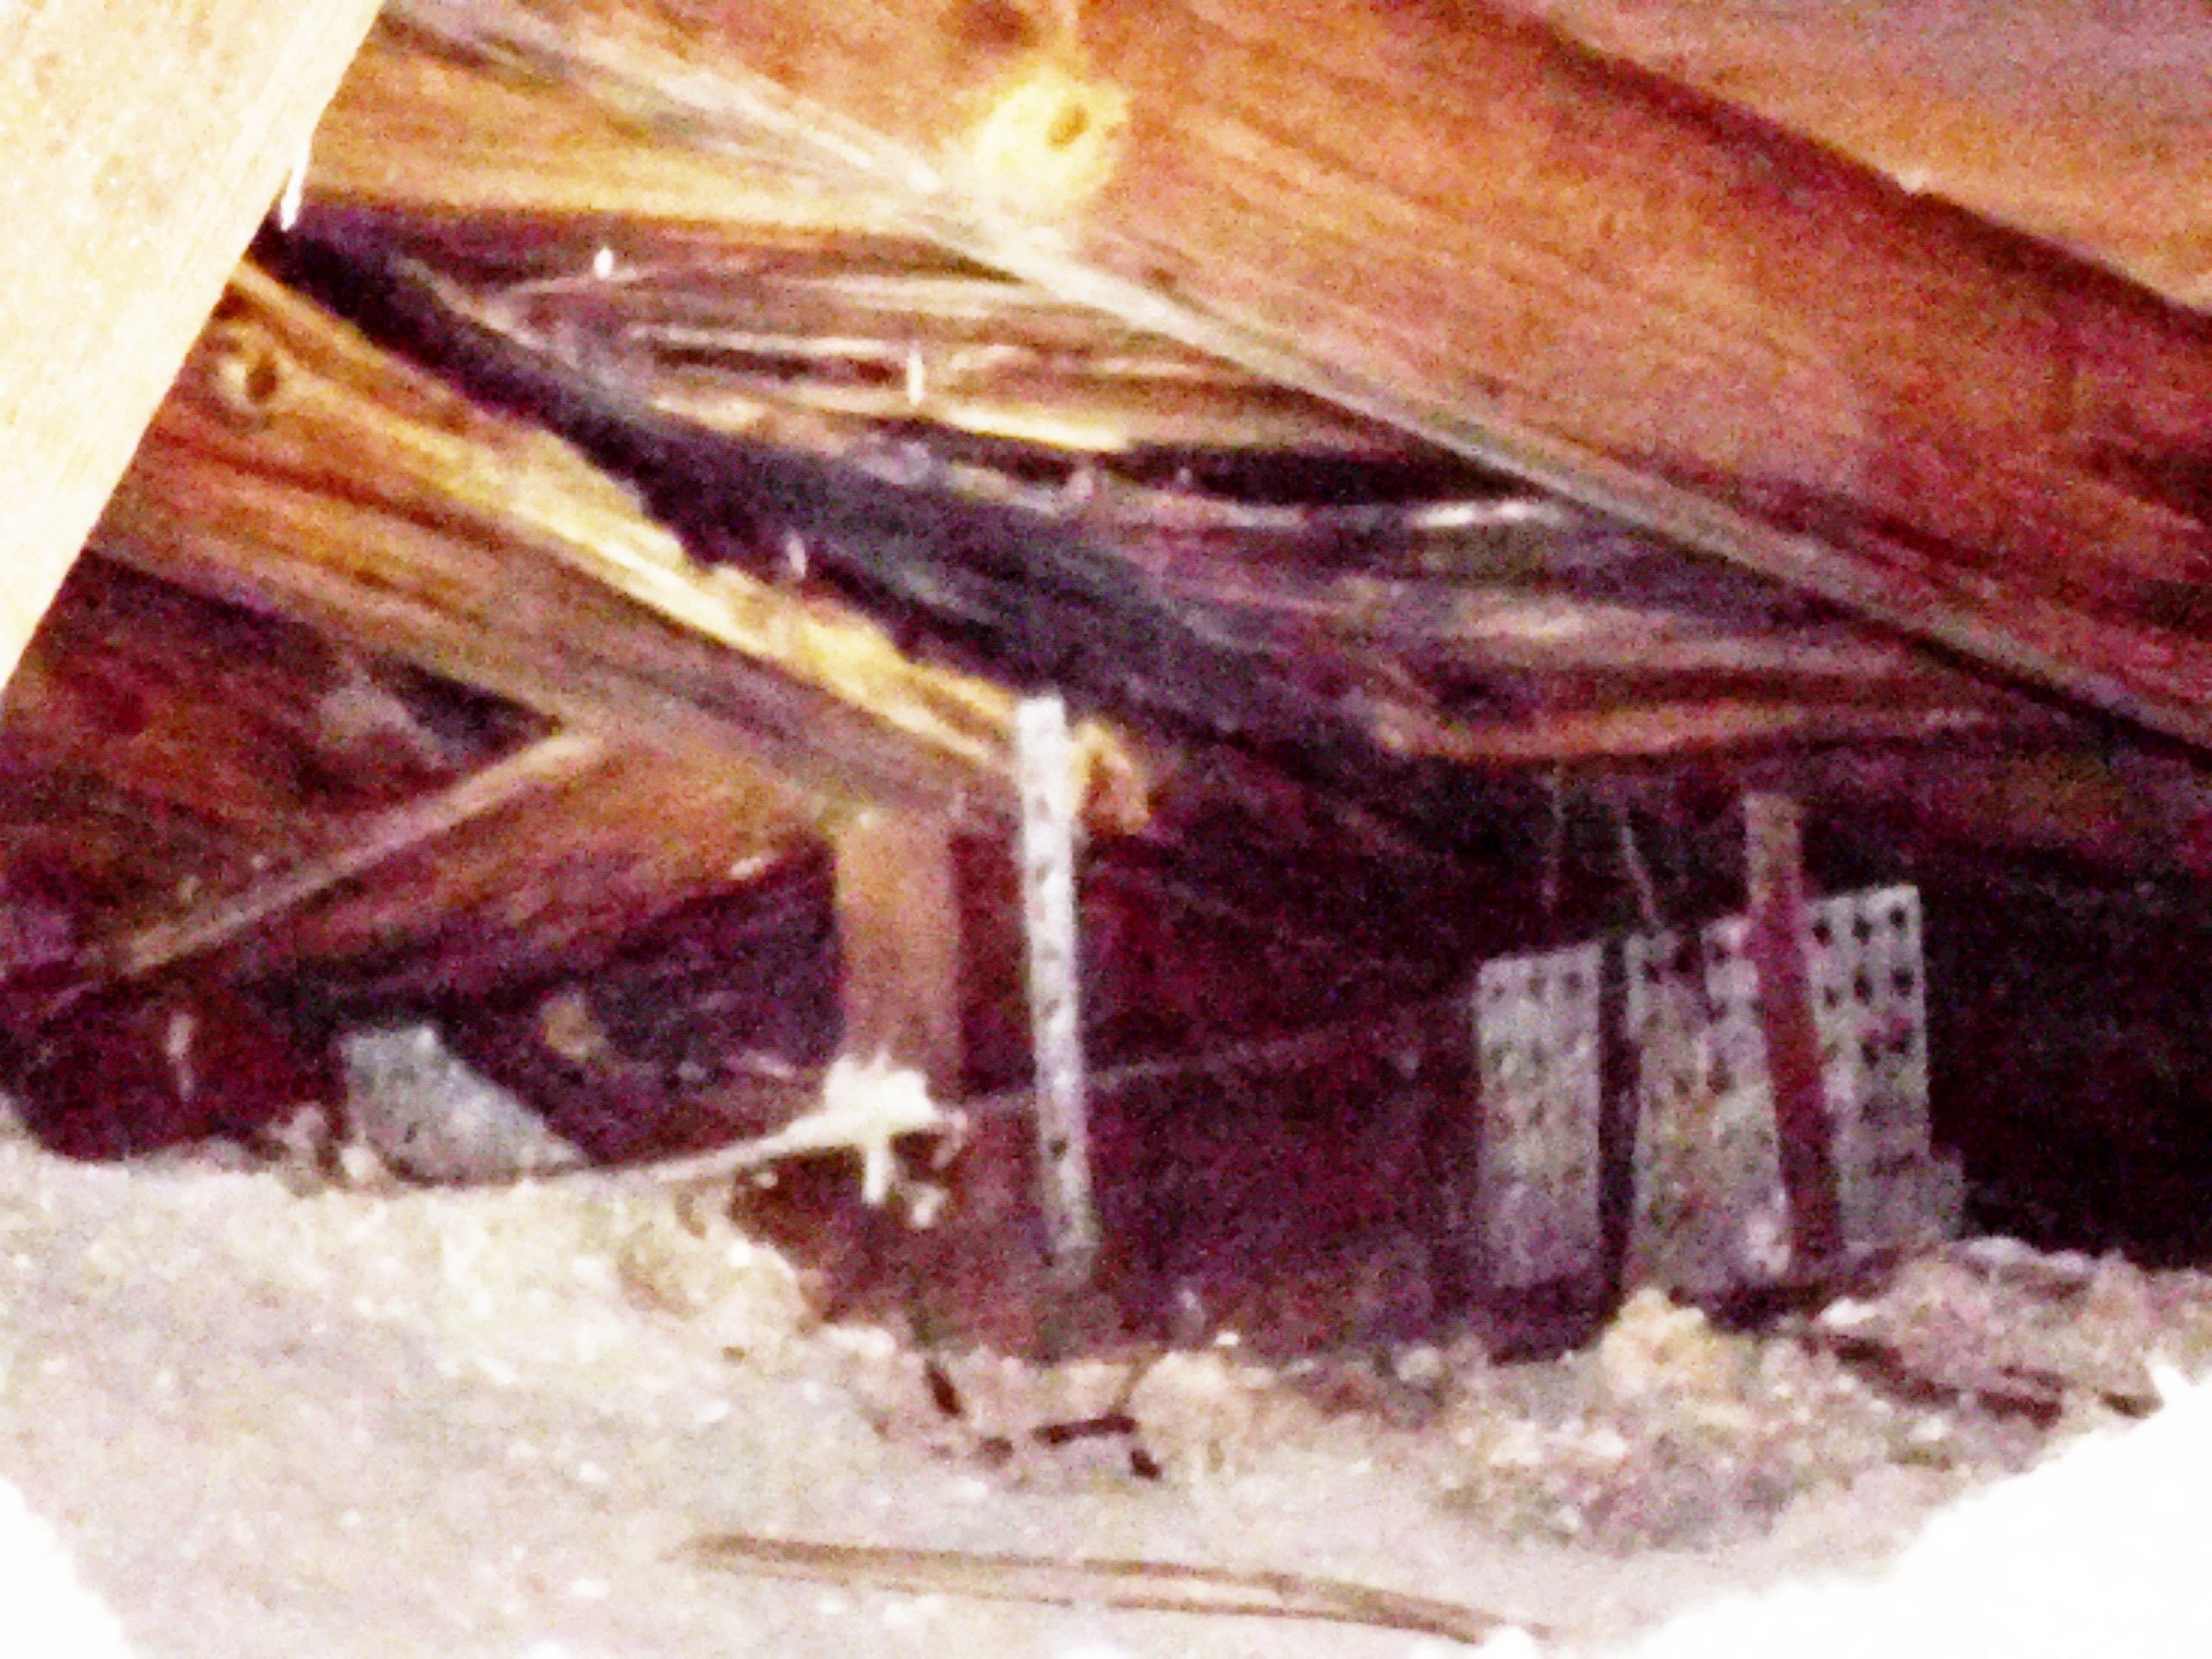 Picture of damaged roof structure and sheathing due to active leak